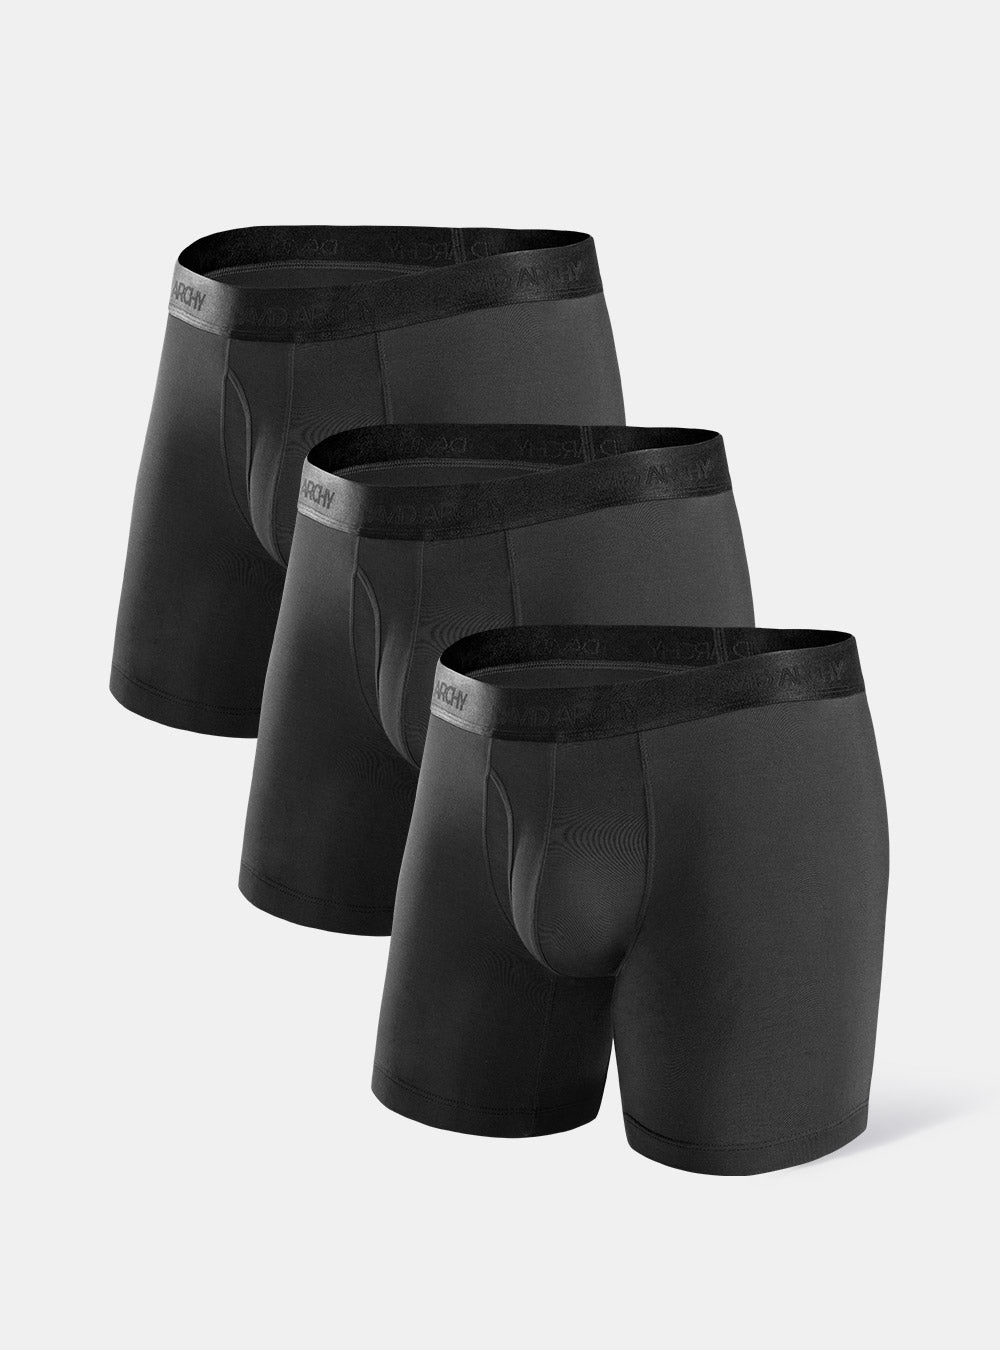 Buy DAVID ARCHYMen's 4 Pack Micro Modal Separate Dual Pouch Briefs with Fly  Online at desertcartBarbados